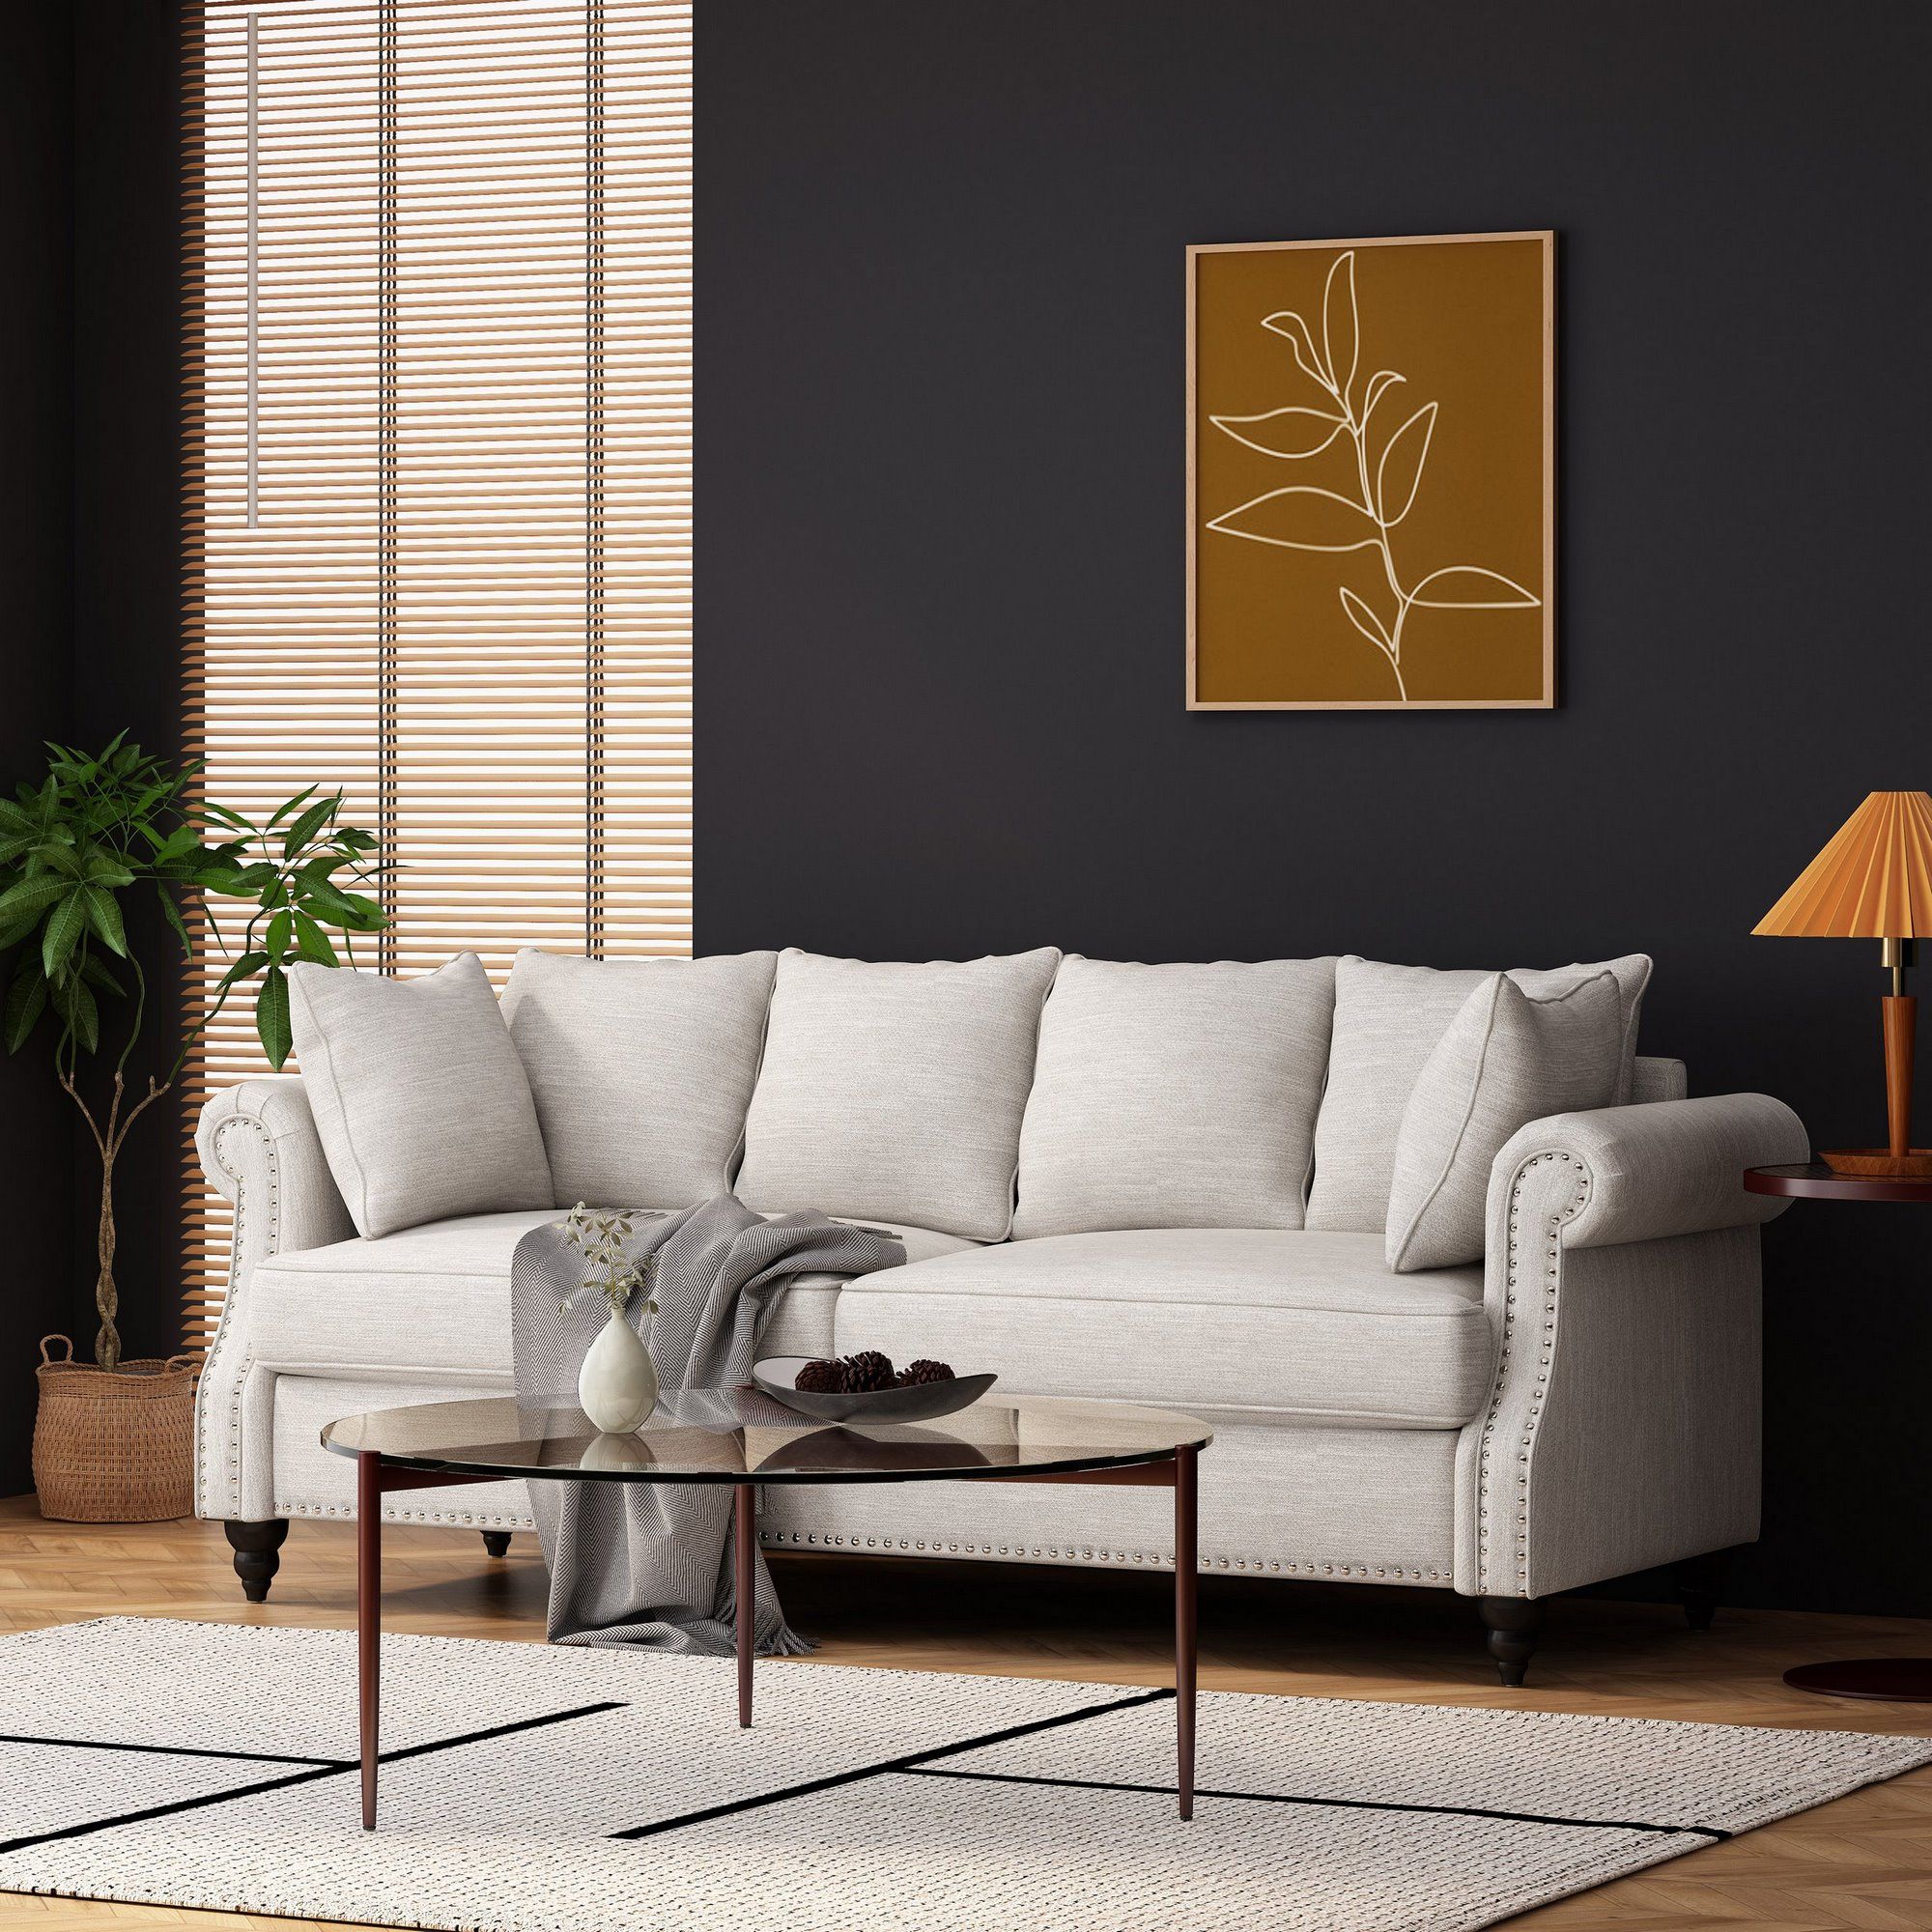 Manbow Contemporary Fabric Pillowback 3 Seater Sofa With Nailhead Trim,  Beige And Dark Brown Throughout Sofas With Pillowback Wood Bases (View 7 of 15)